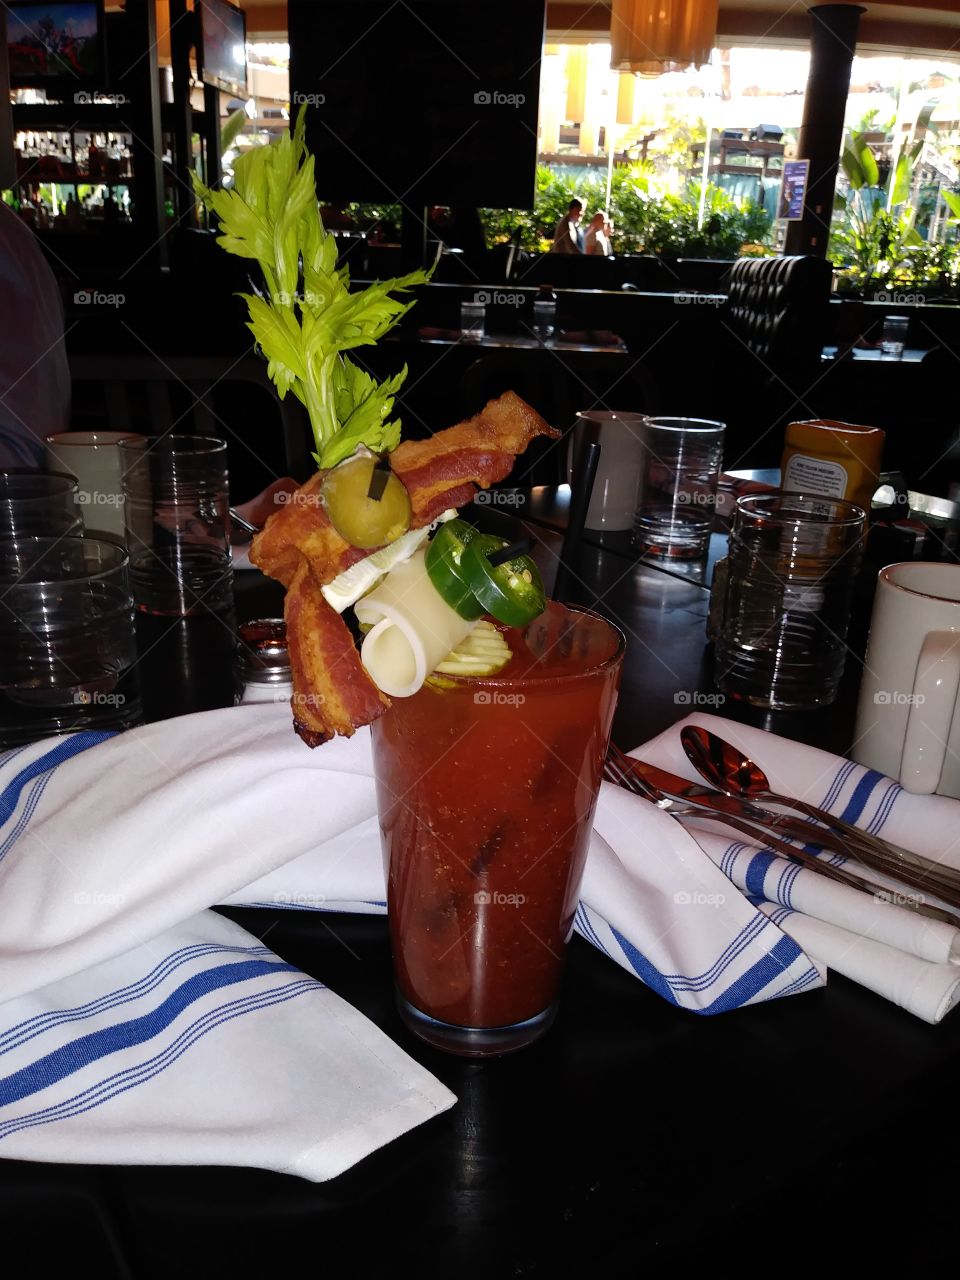 nothing like a bloody MARIA for breakfast